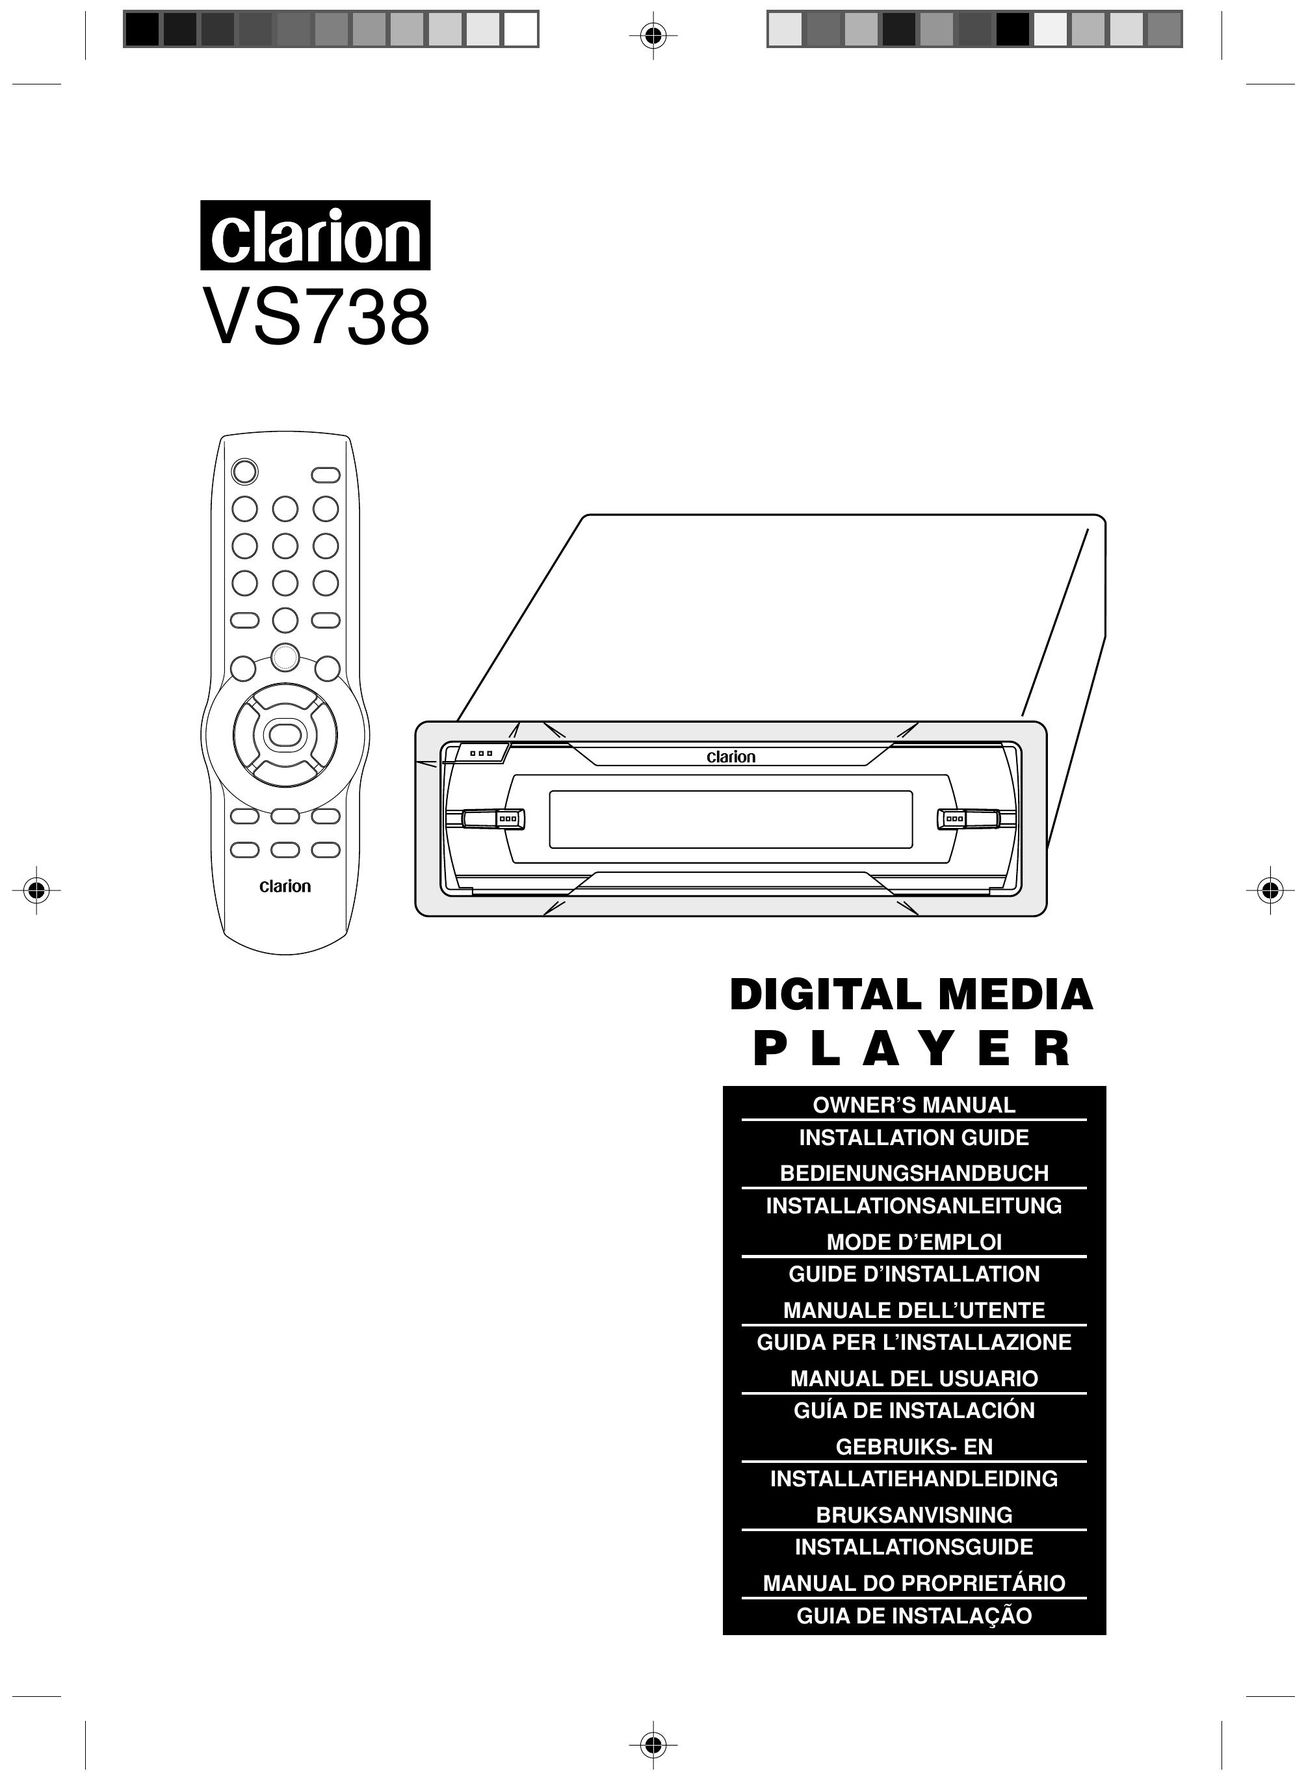 Clarion VS738 MP3 Player User Manual